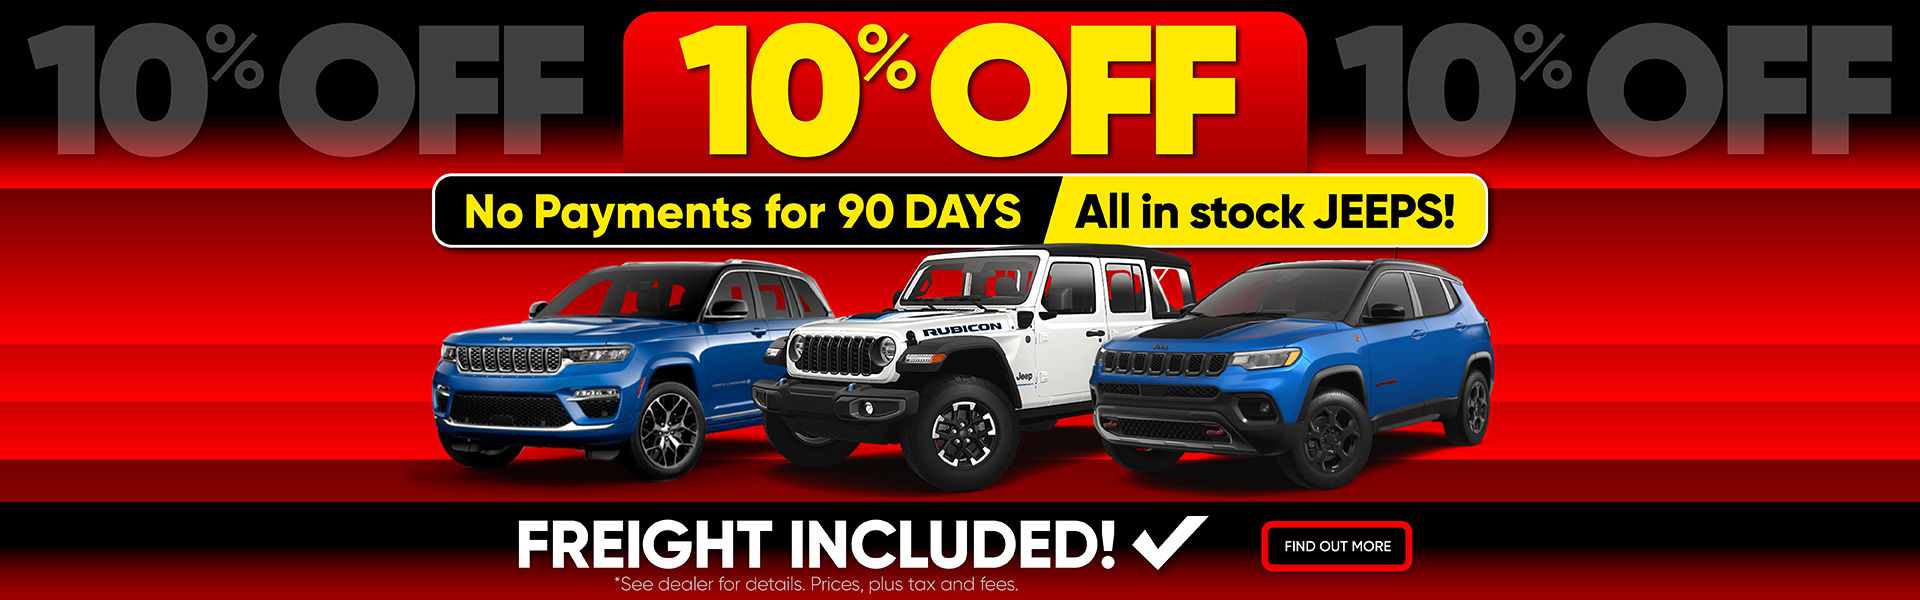 Get 10% OFF All-in-stock Jeeps and No Payment for 90 days!